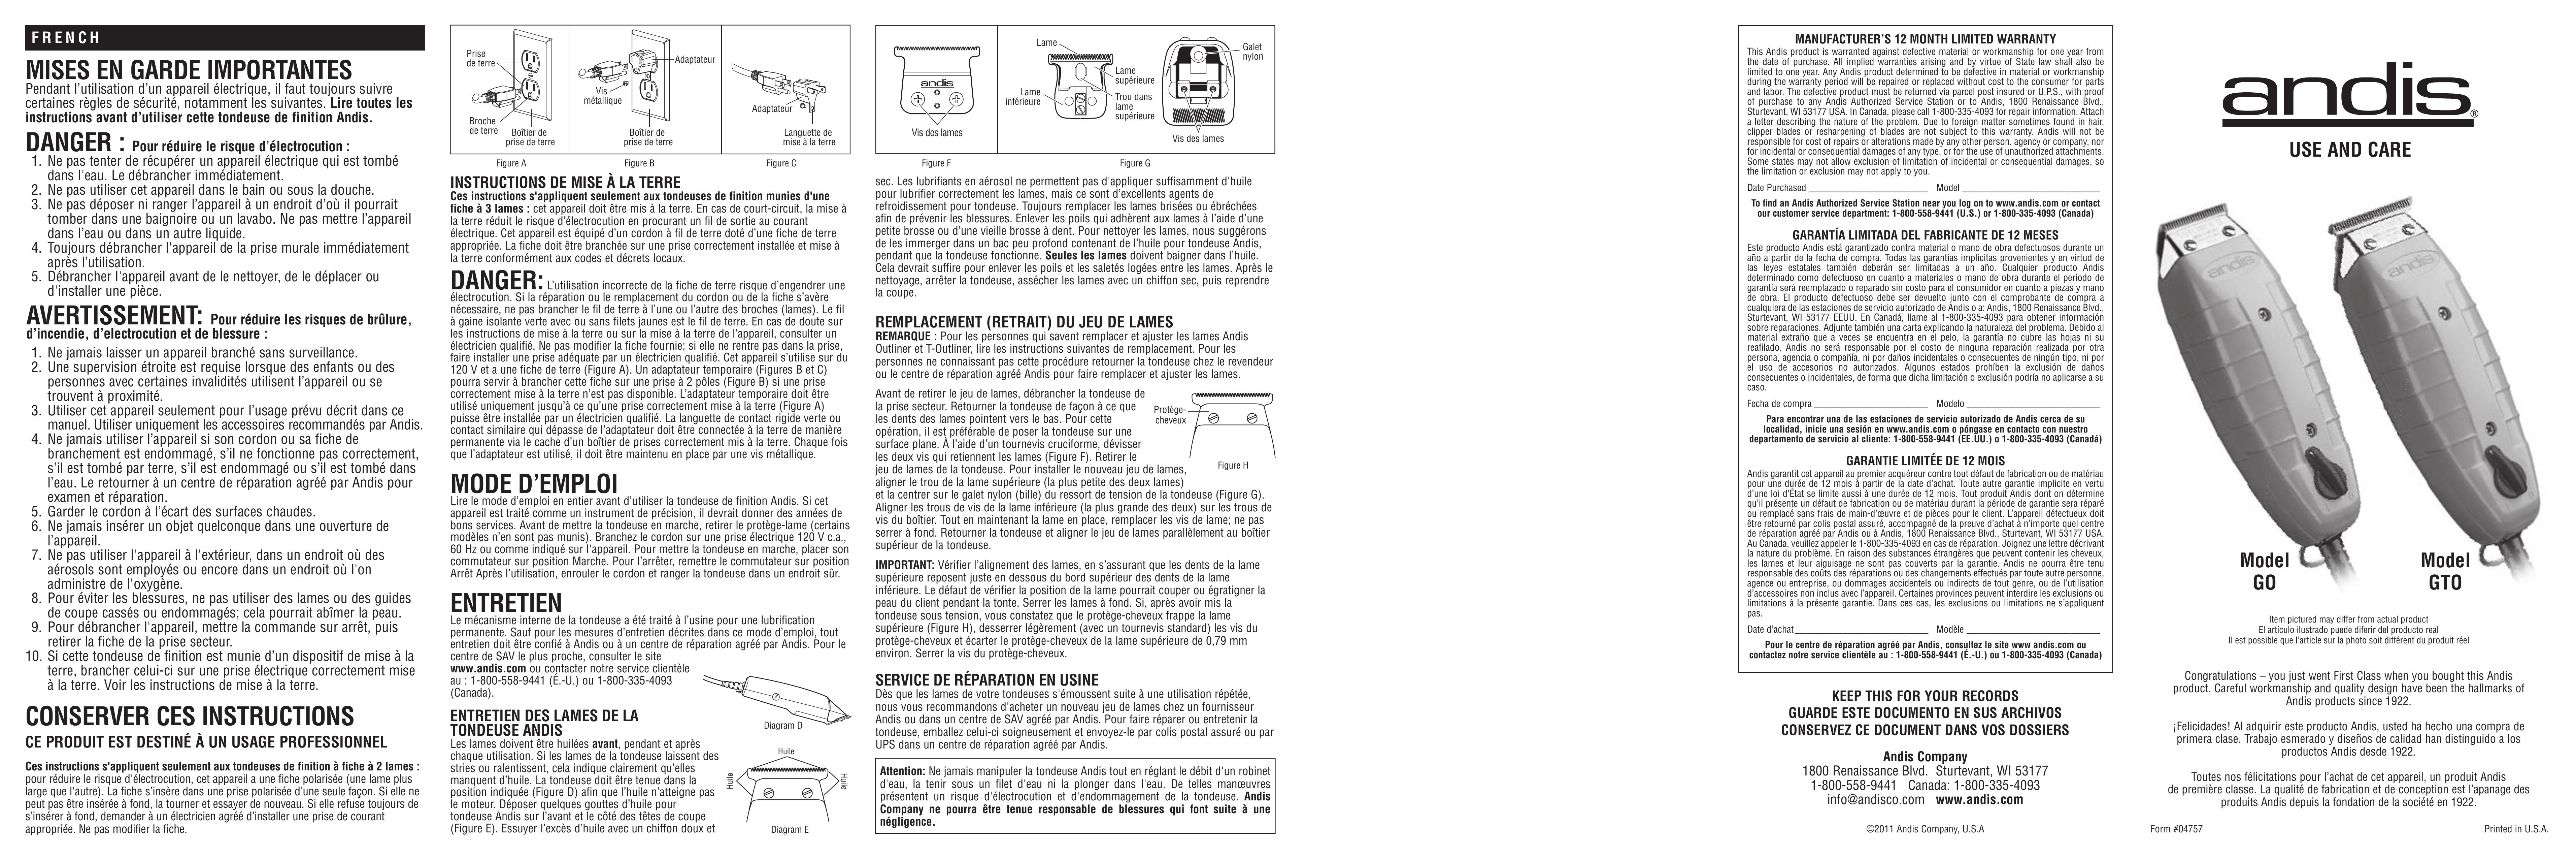 Andis Company GTO Electric Shaver User Manual